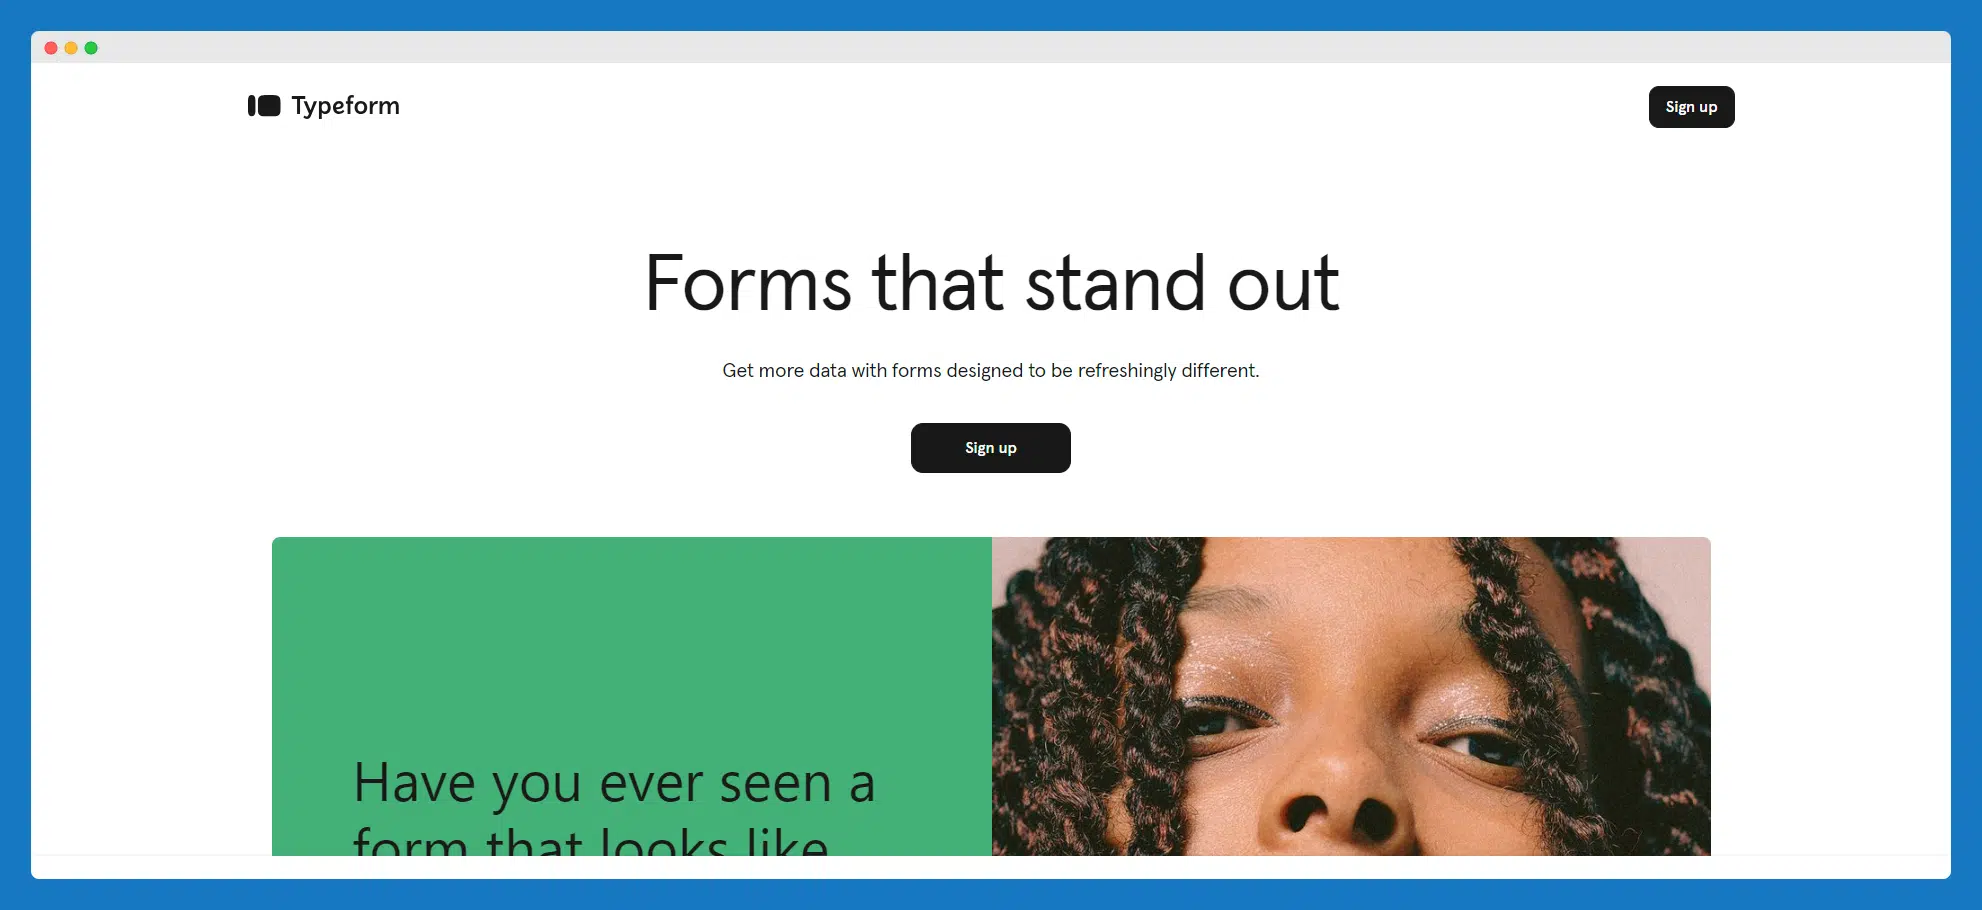 Typeform as an alternative to Google Forms